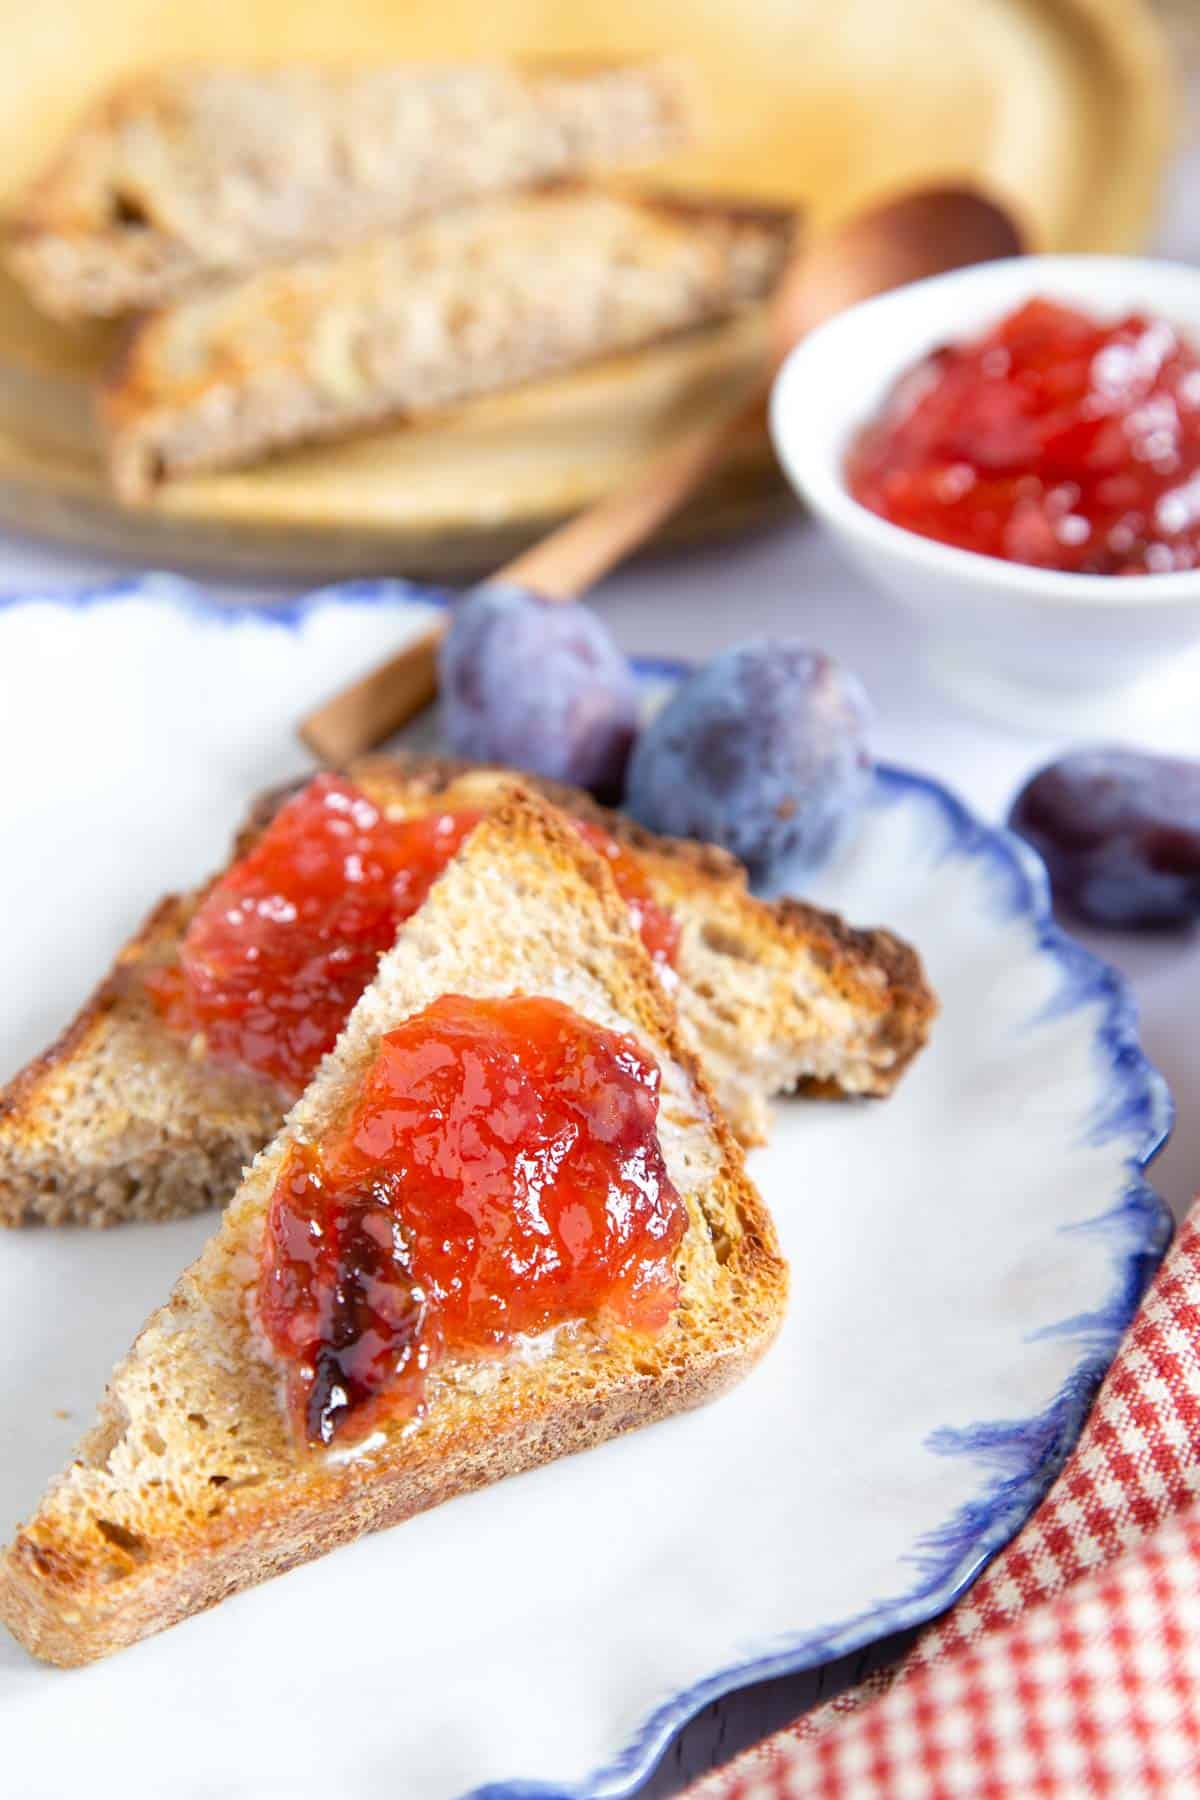 Toast spread with plum and apple jam, set on a white plate with a blue rim, contrating with a red gingham cloth.